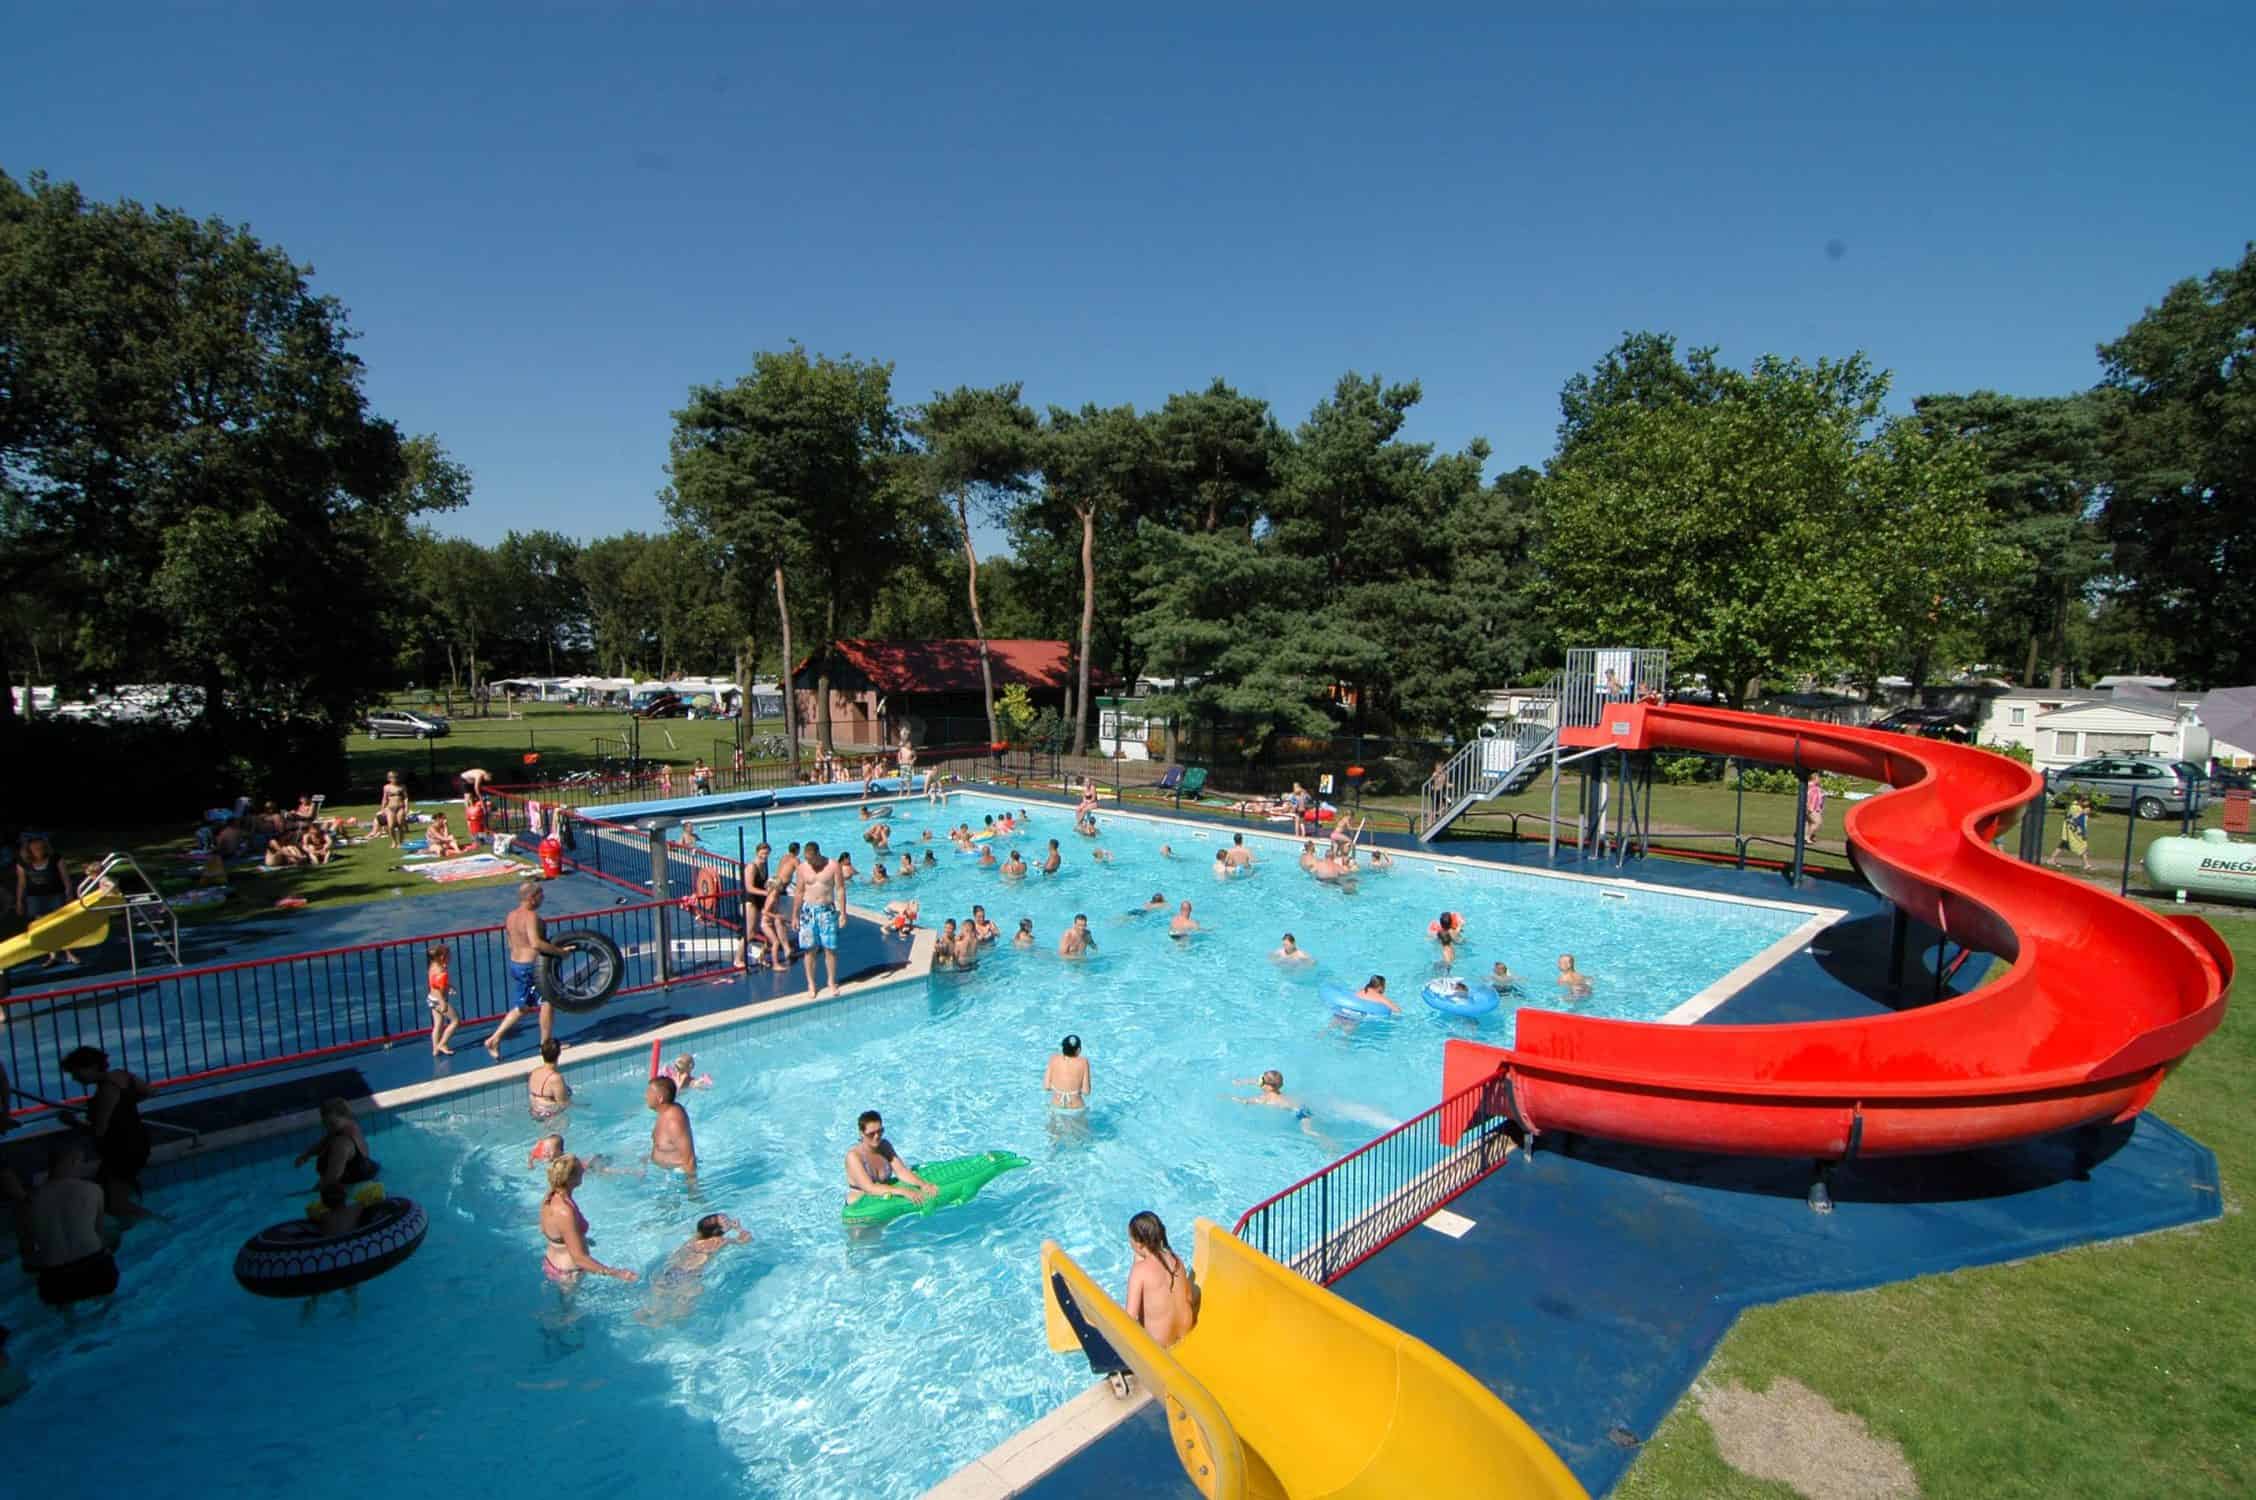 Outdoor pool in Limburg for young and old: Beringerzand in Panningen